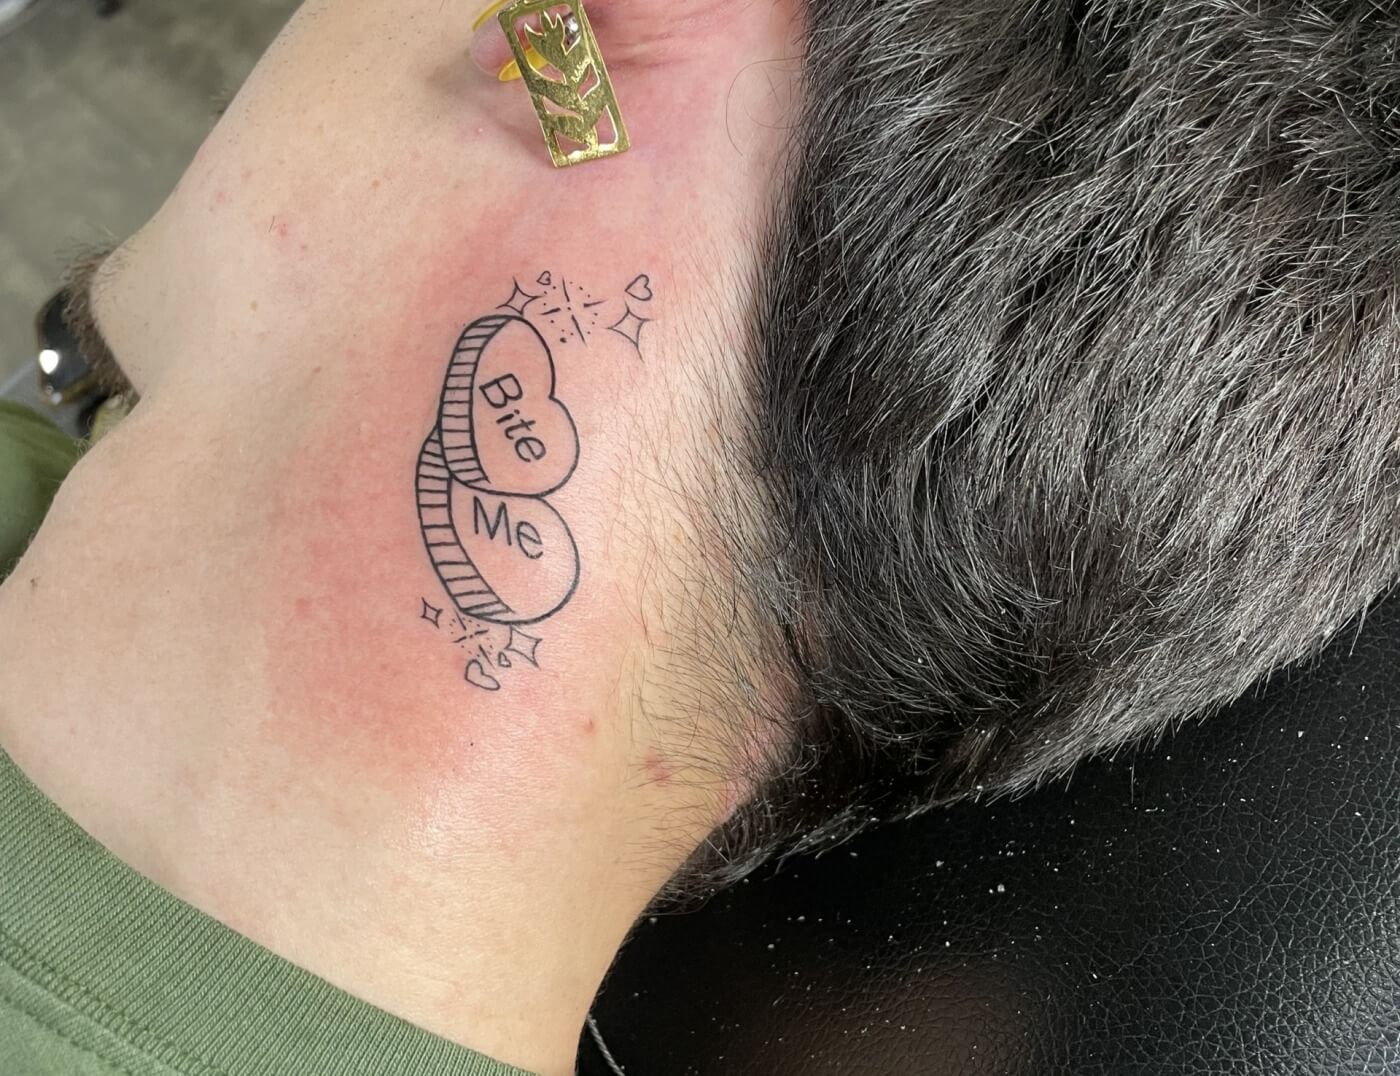 Candy hearts script tattoo by Paper Airplane Jane of Iron Palm Tattoos in downtown Atlanta, GA. Jane is a female tattooer. Call 404-973-7828 or stop by for a free consultation with a body artist. Walk Ins are welcome.